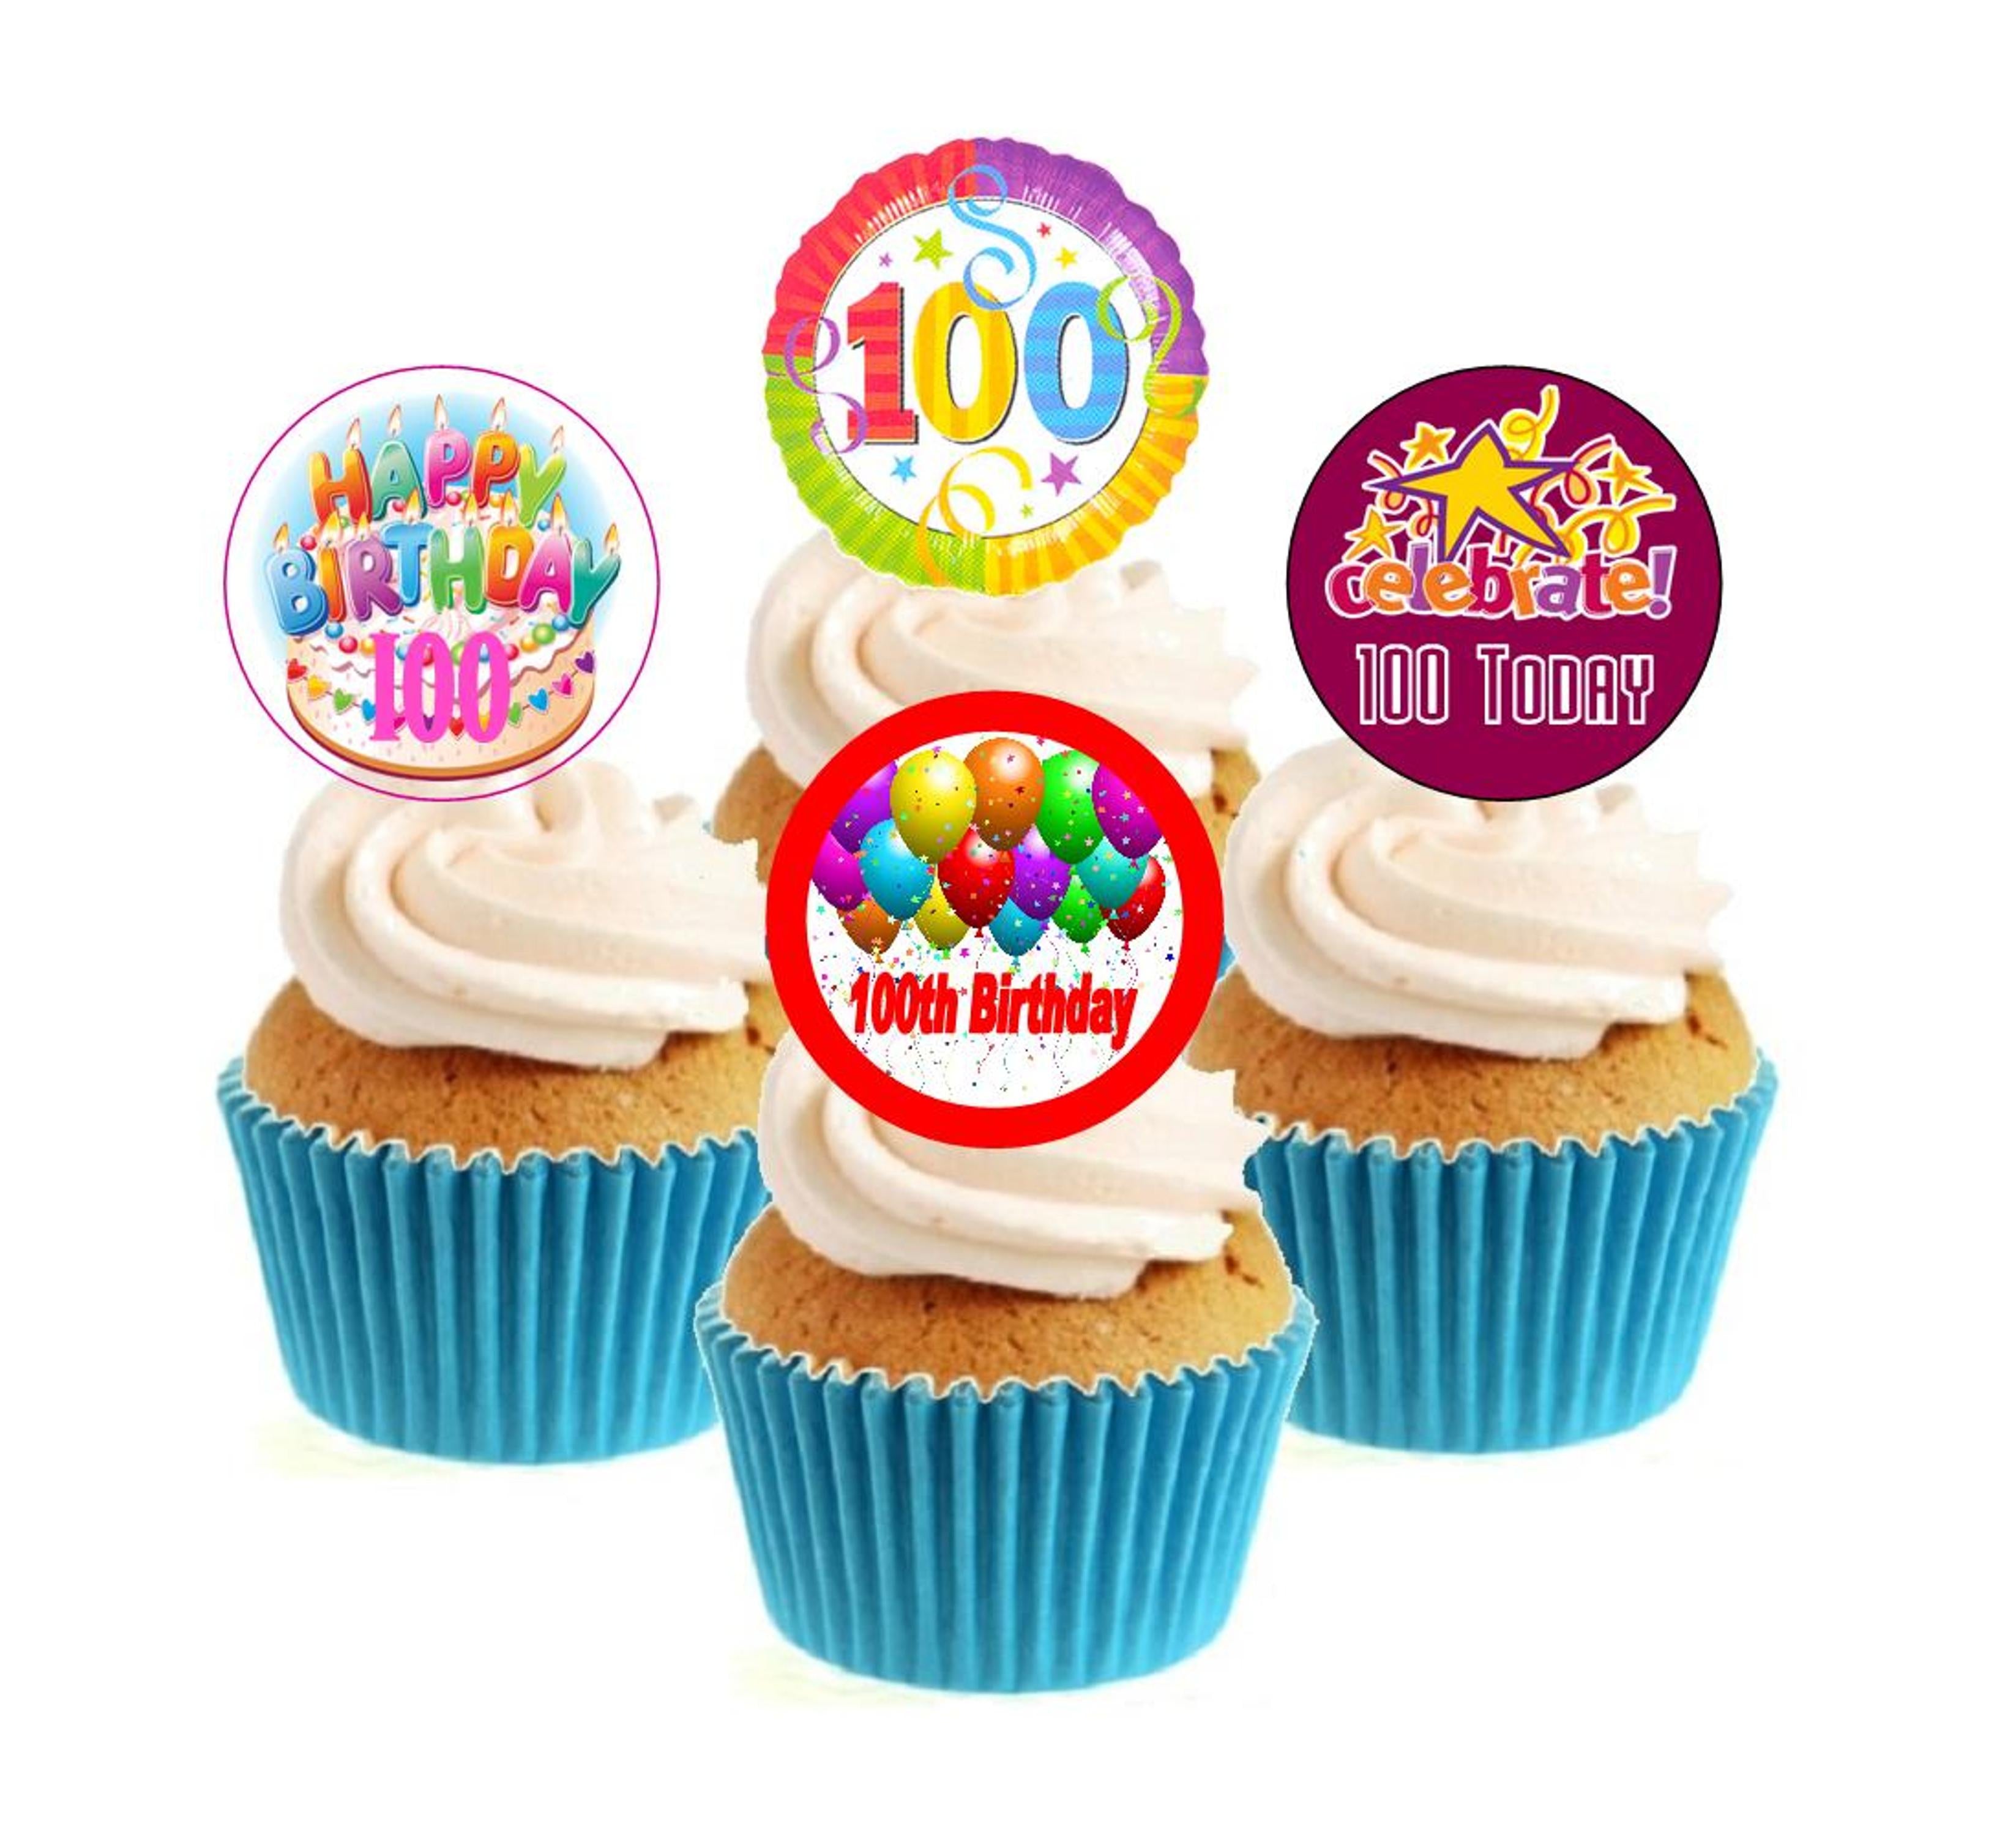 100 years loved - Cake Toppers